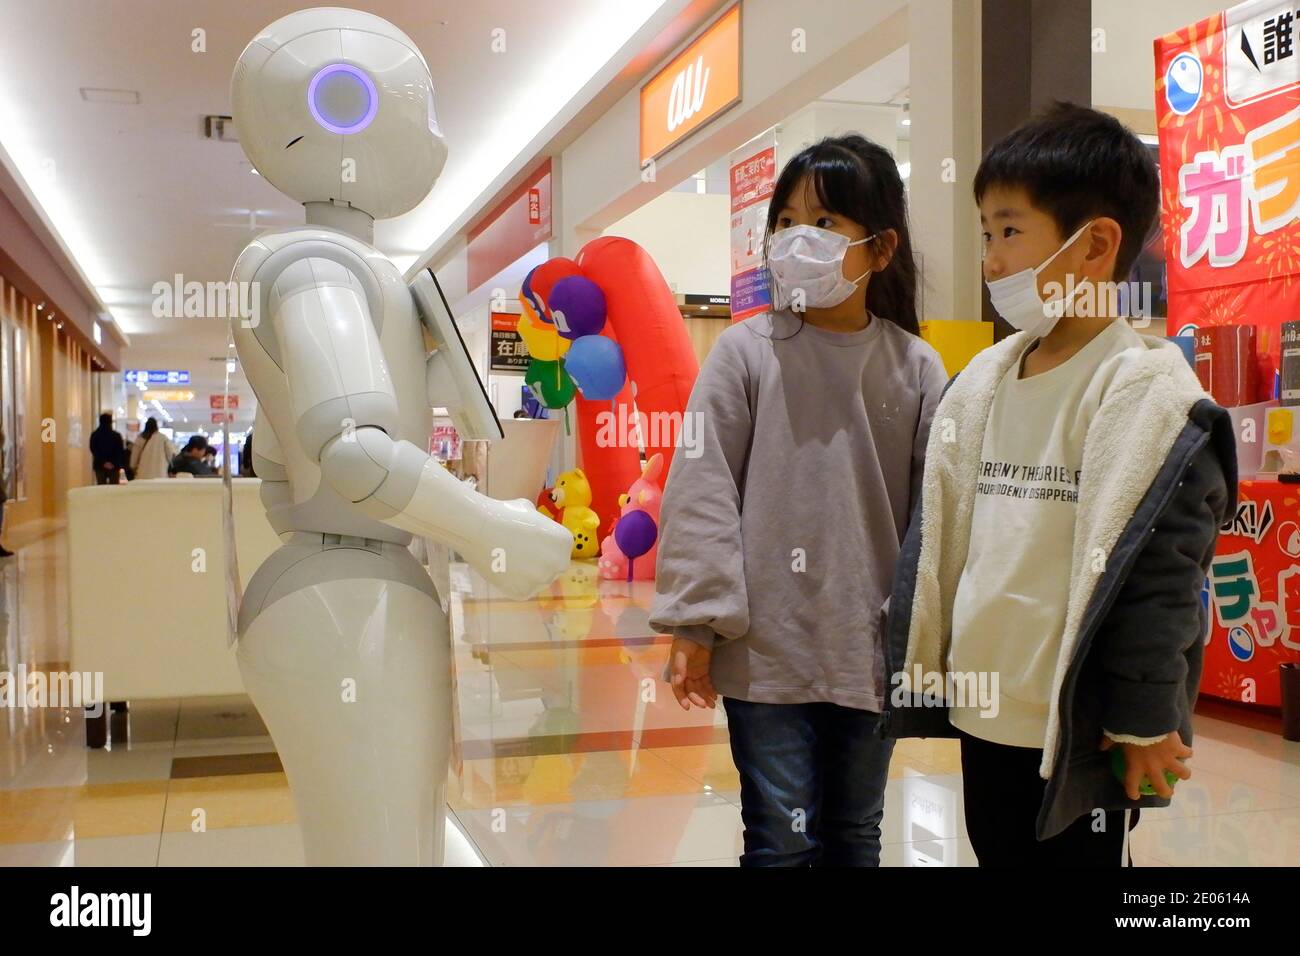 Tokyo, Japan. 30th Dec, 2020. A humanoid robot Pepper wearing a face mask is displayed as Tokyo Metrpolitan Government hires a hotel for the new accomodations of the patients of the new coronavirus with mild symptons in Tokyo.The Tokyo metropolitan government on Wednesday reported 944 new cases of the coronavirus, up 88 from Tuesday. The number is the result of 2,084 tests conducted on Dec 27. (Photo by Michele Sawada/Sipa USA) Credit: Sipa USA/Alamy Live News Stock Photo